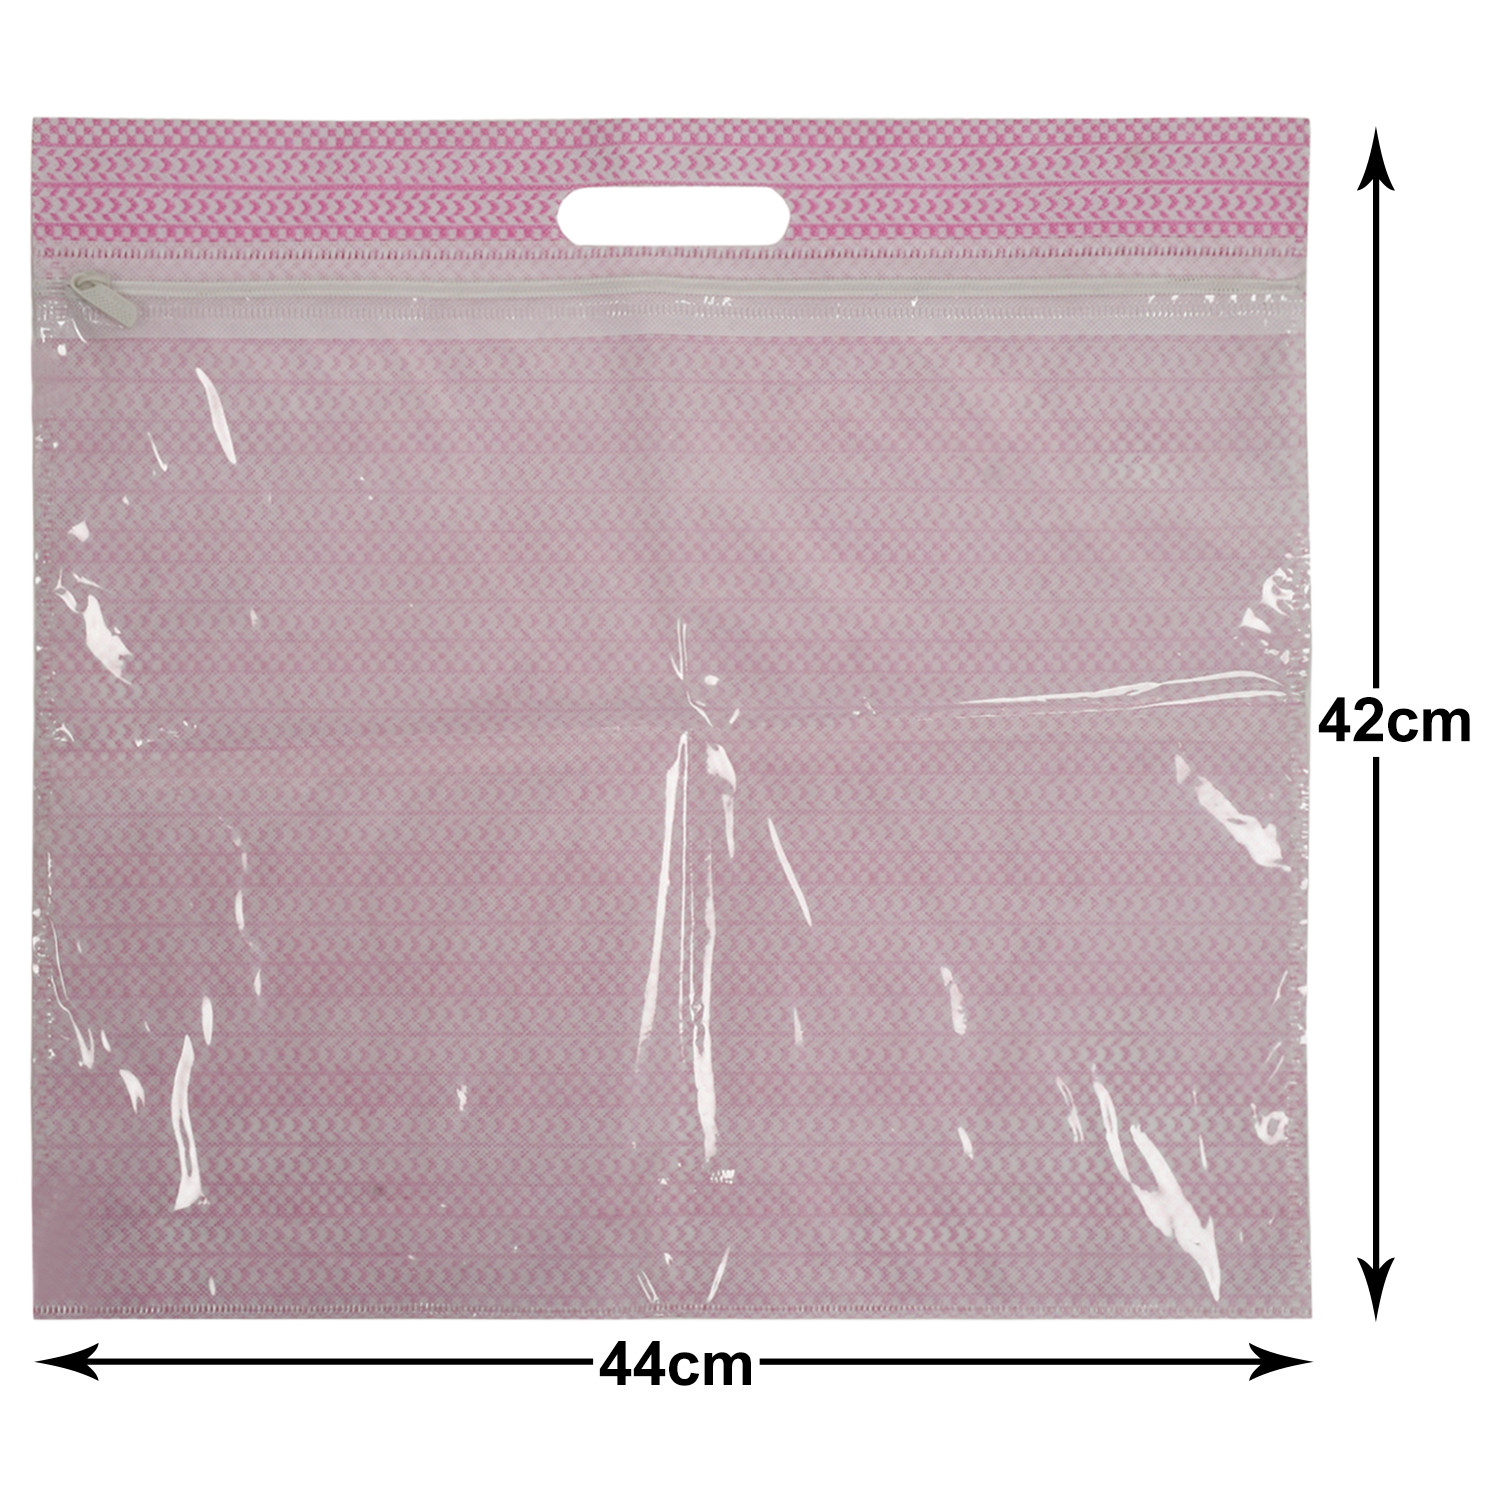 Kuber Industries Non-Woven Single Saree Covers With Transparent Window With Handle Pack of 6 (Pink & Brown)